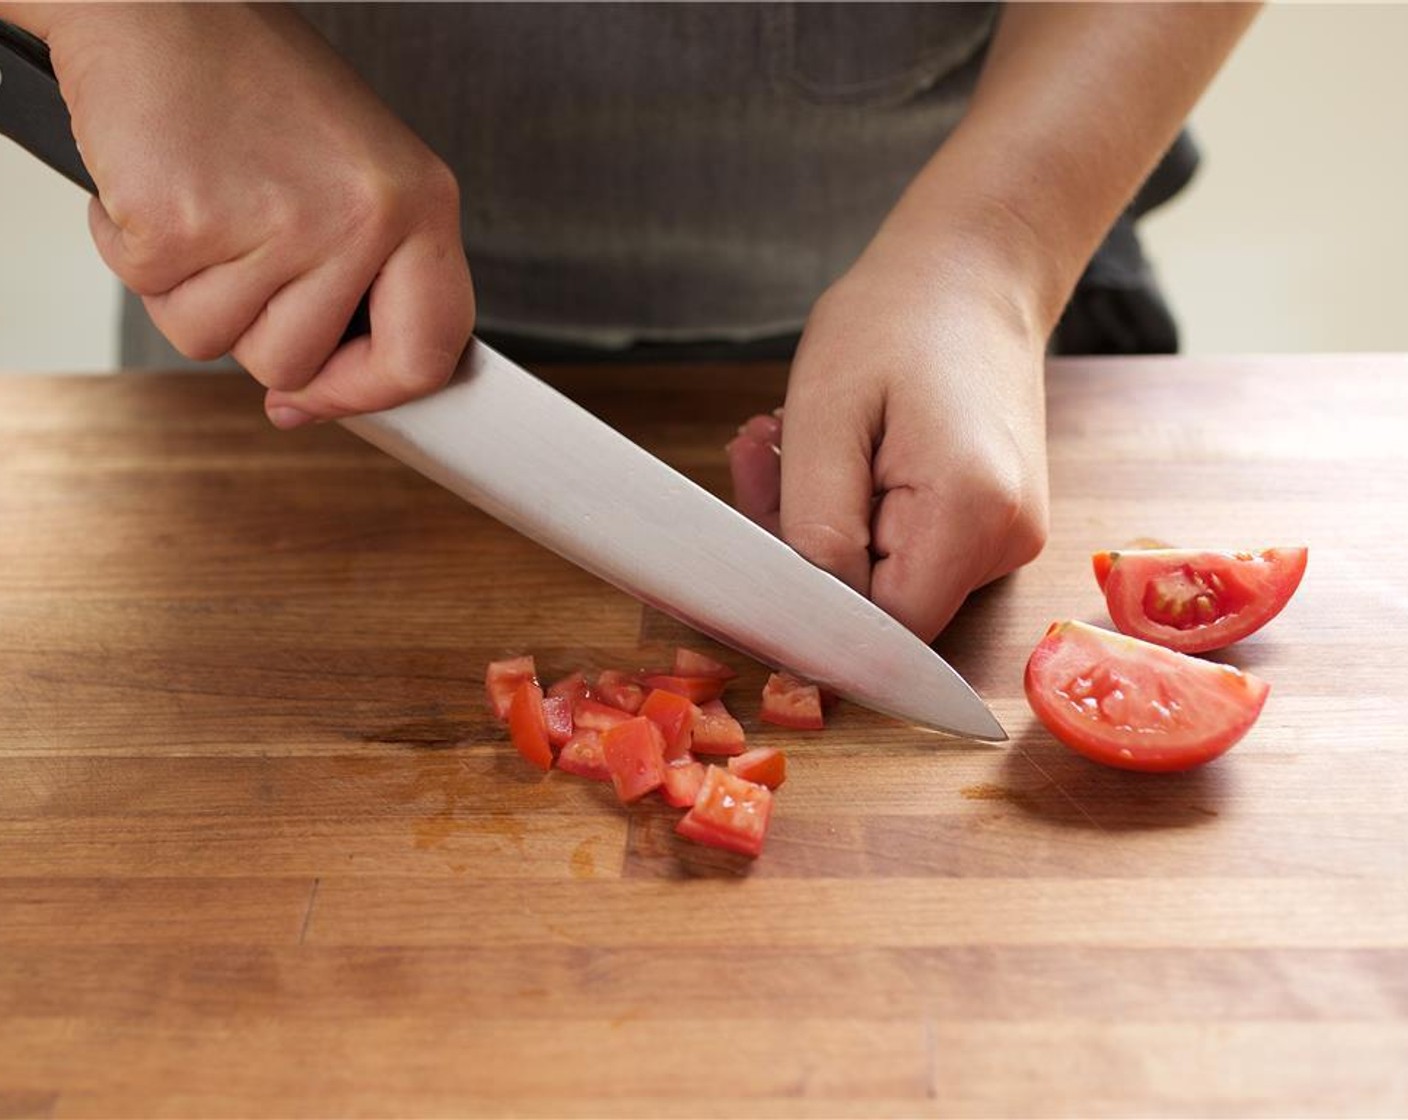 step 2 Cut the Roma Tomato (1) lengthwise into four wedges. Scoop out the seeds and discard. Slice the tomato into thin, long, quarter inch strips, and then cut across the strips into half inch diced pieces.